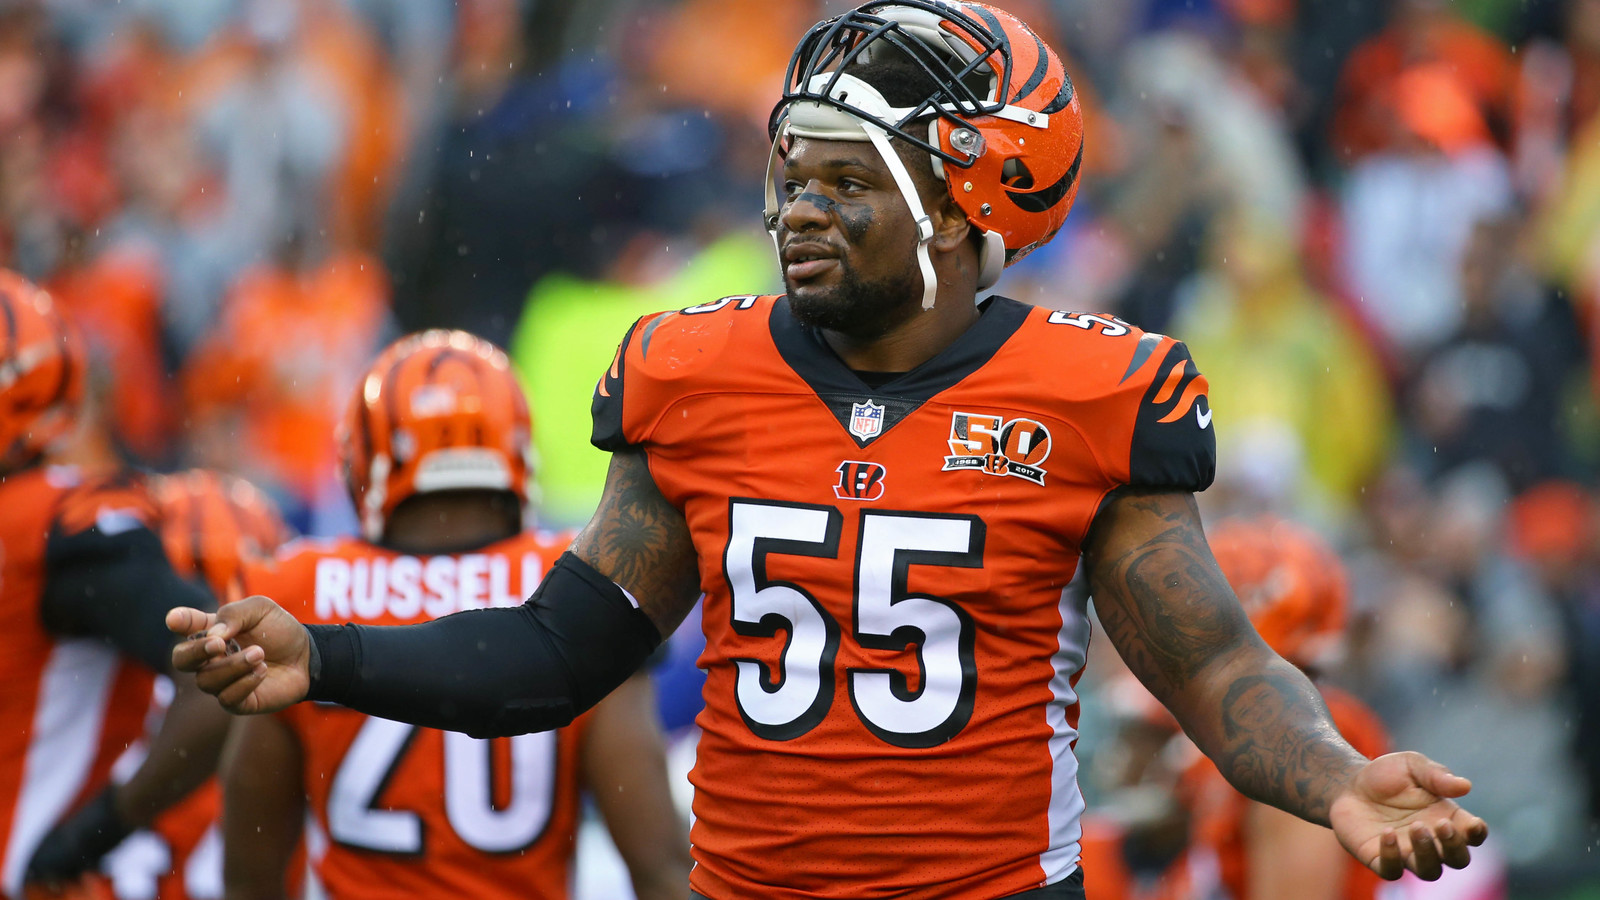 Vontaze Burfict ejected after making contact with official, taunts fans | Yardbarker1600 x 900